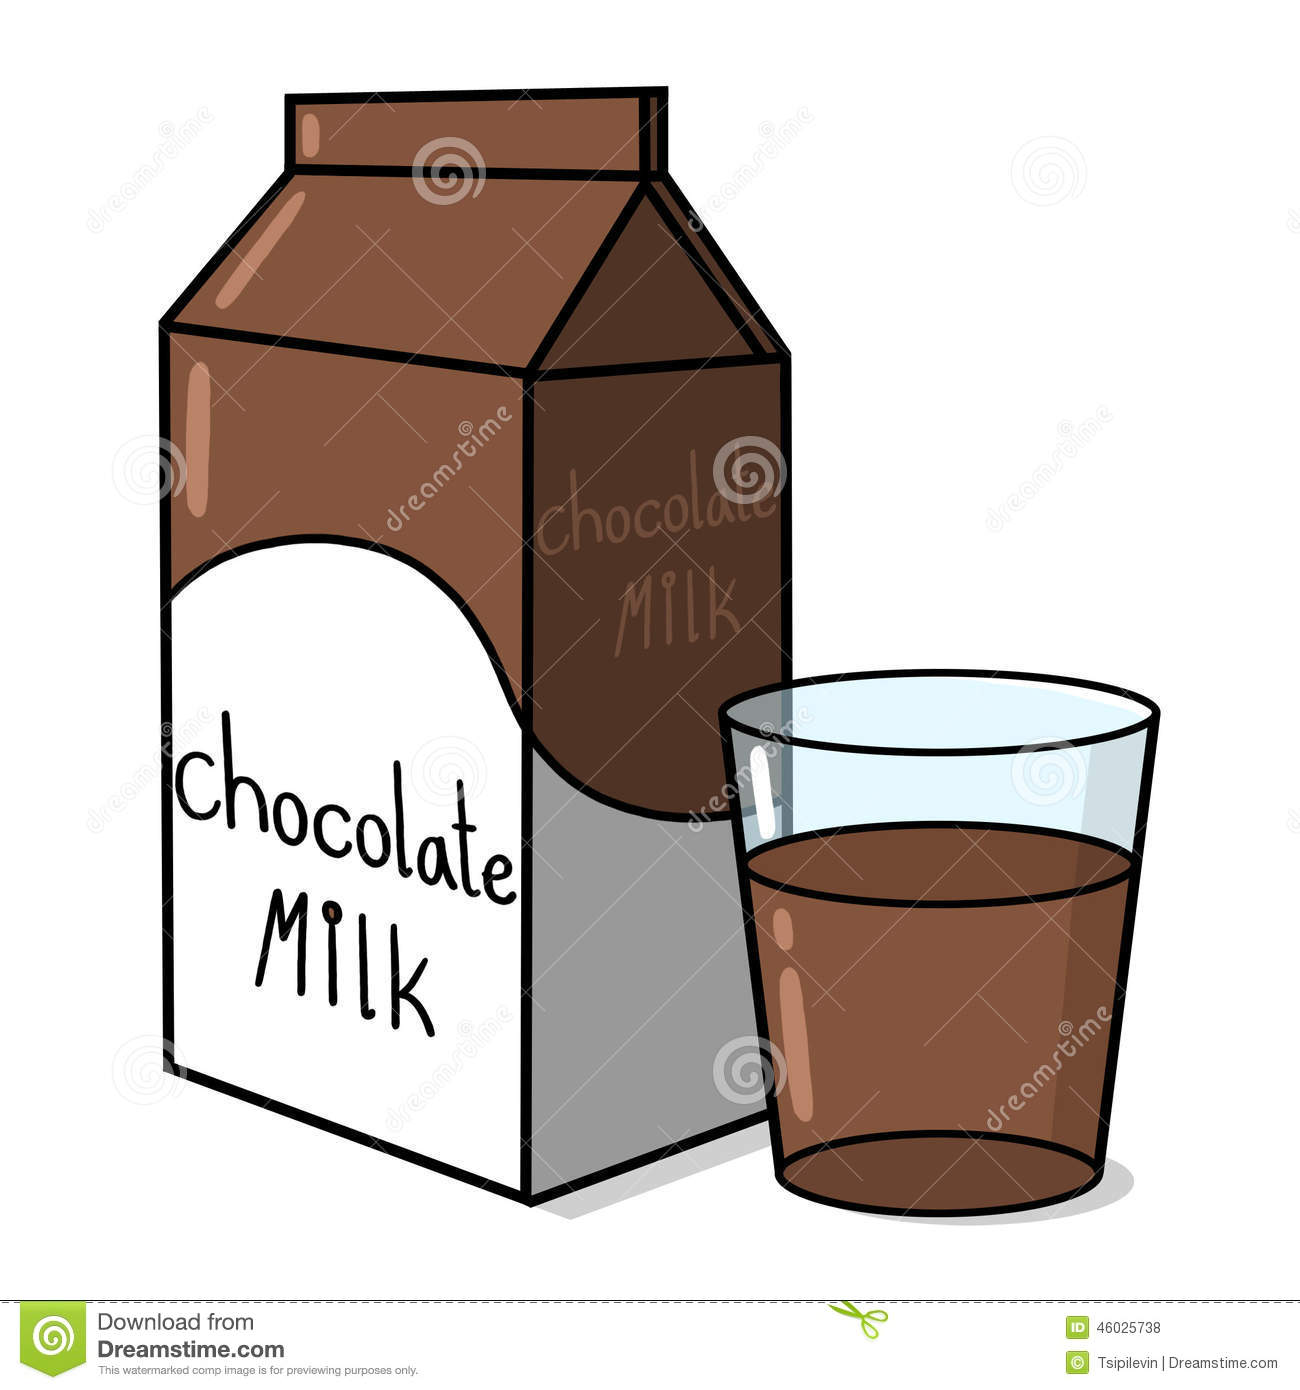 Chocolate Milk Carton And A Glass Illustration  Chocolate Milk And A